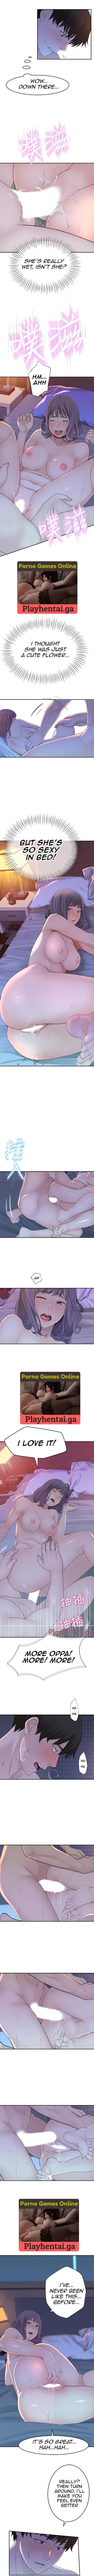 Foursome 우리 사이 | BETWEEN US Ch. 11 Vadia - Page 5